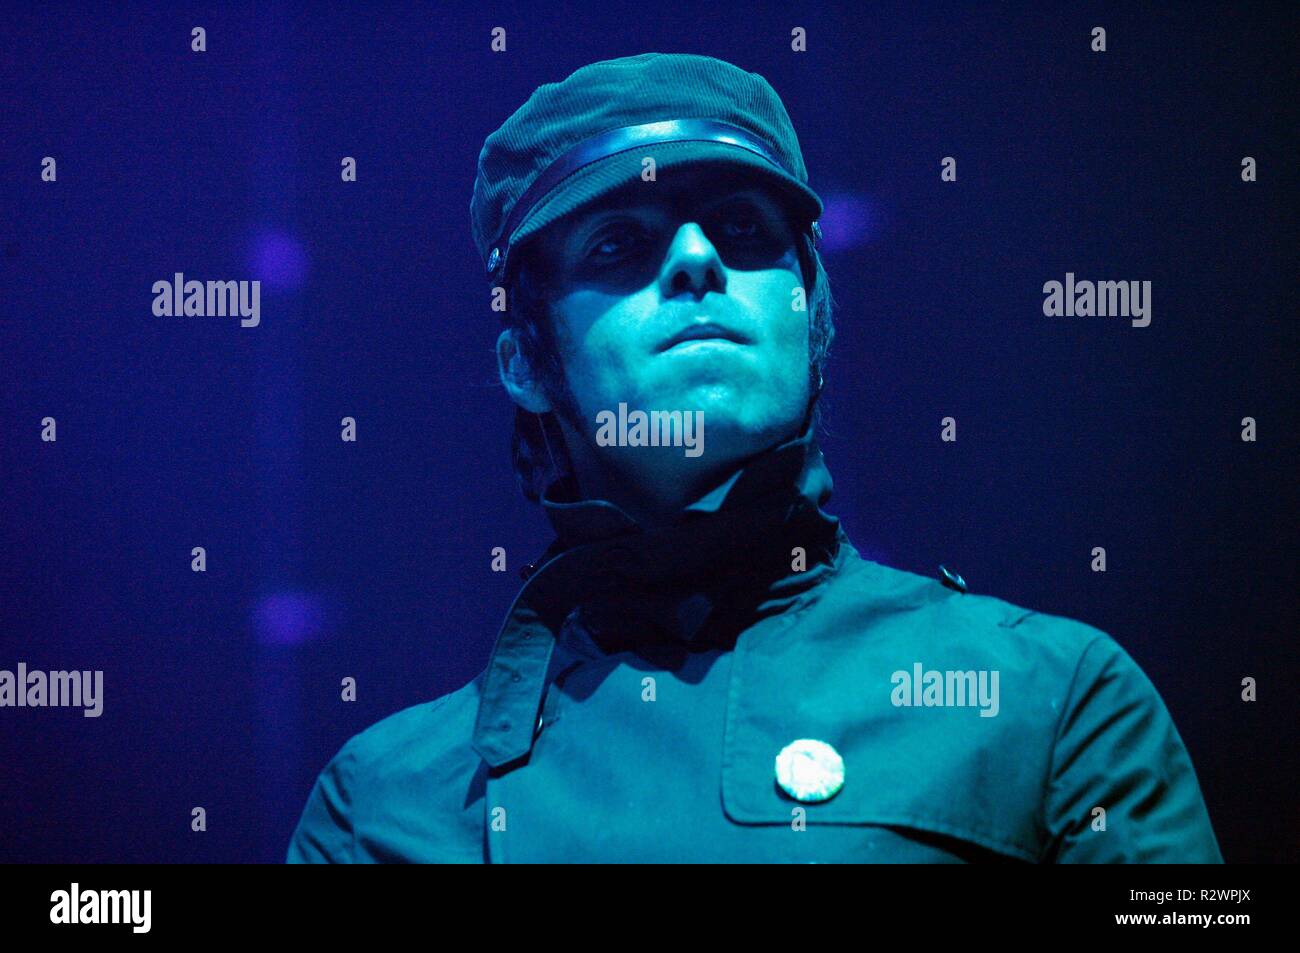 LIAM GALLAGHER OASIS 20 octobre 2005 CTS Allstar61894/Cinetext/Hambourg Banque D'Images